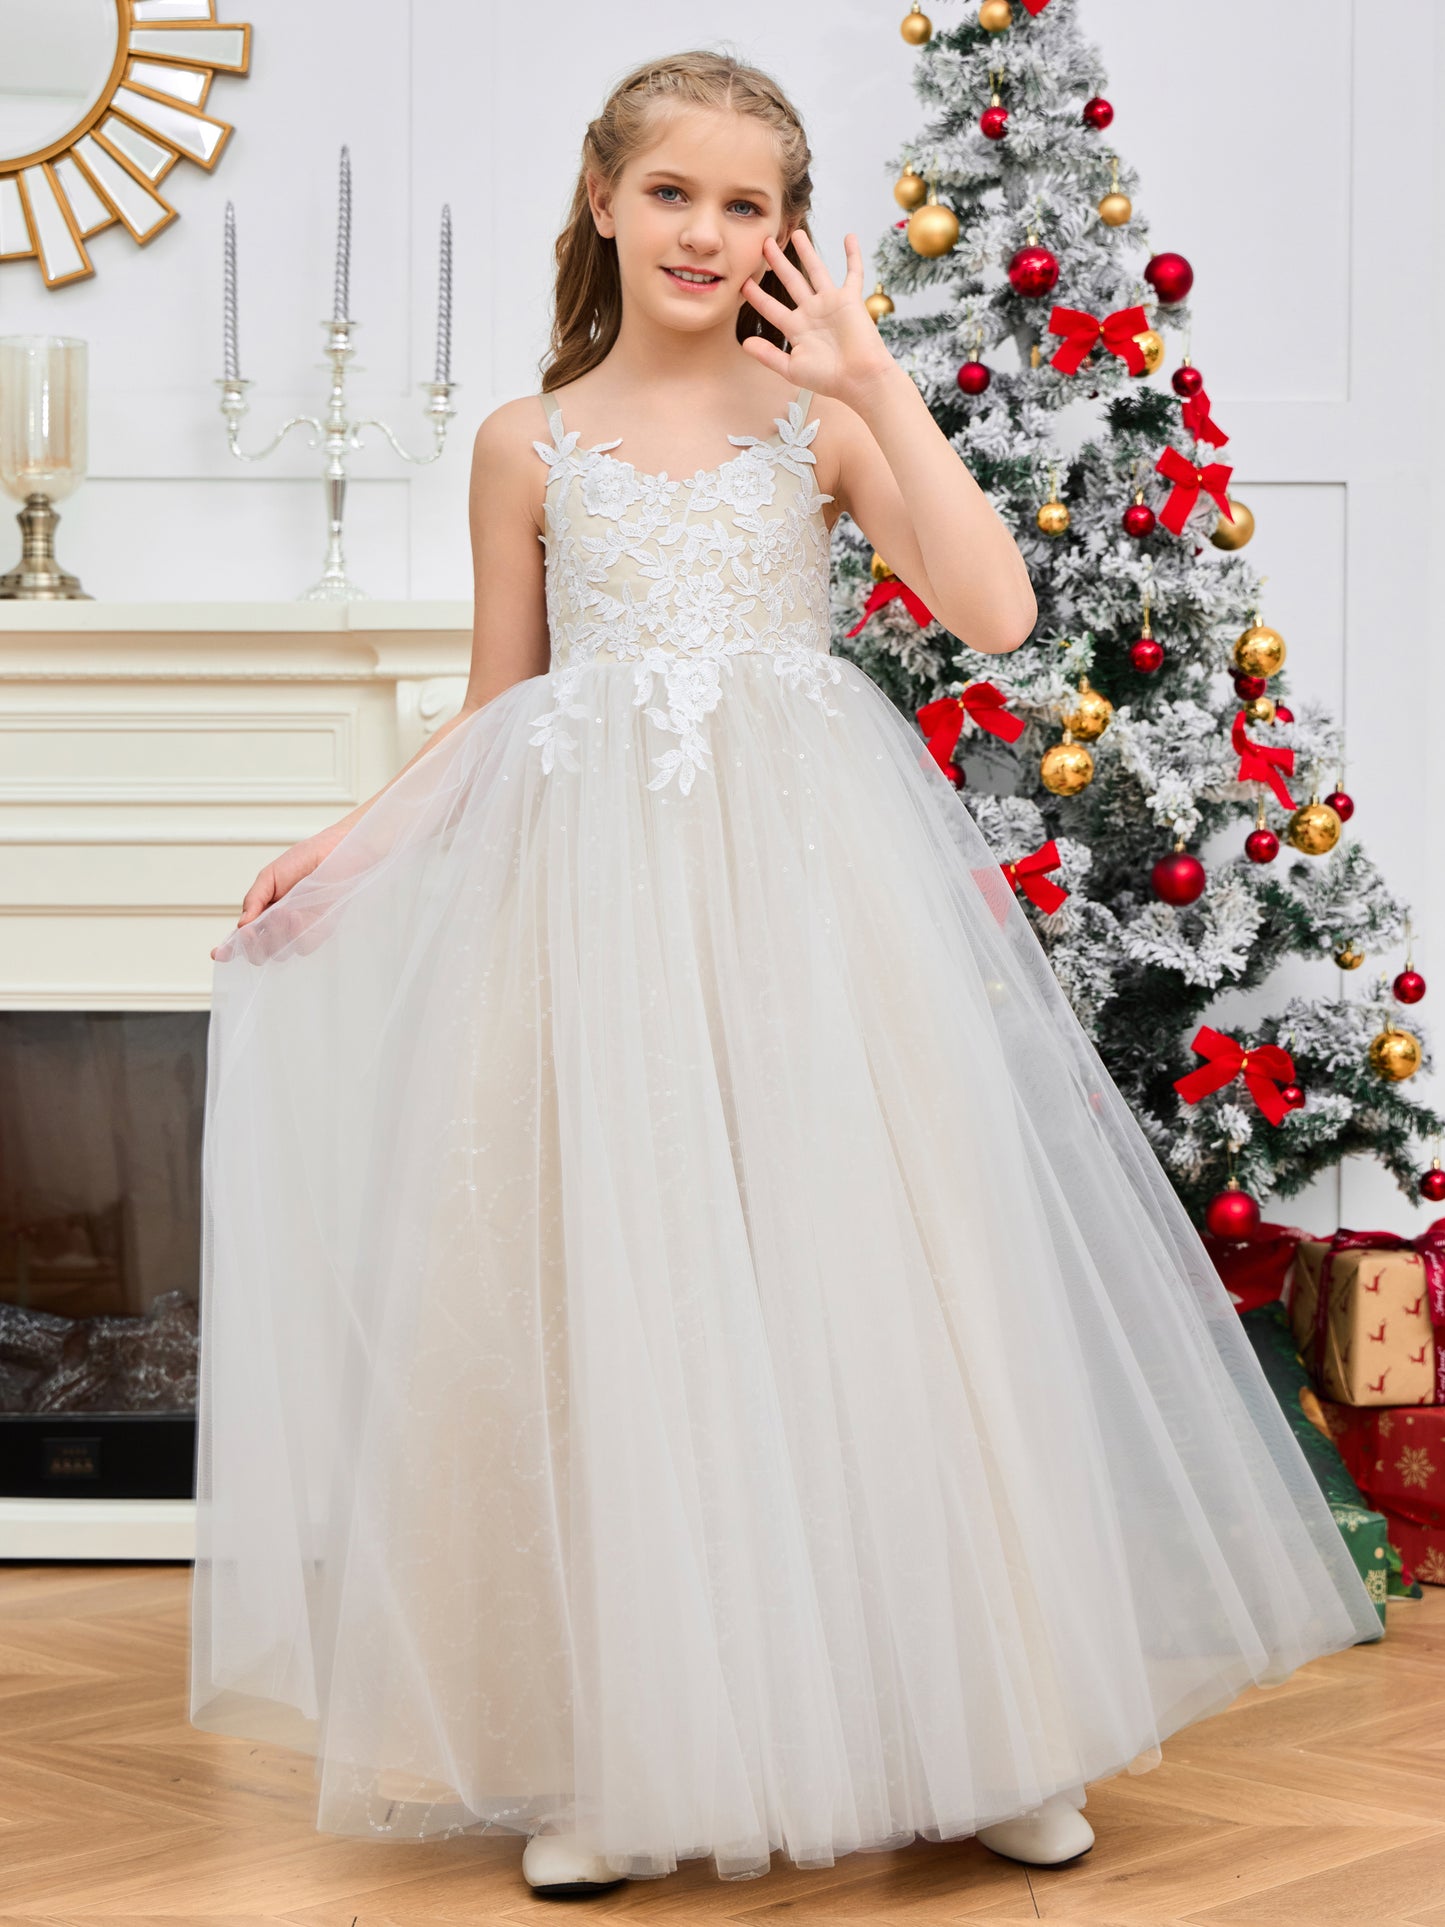 Spaghetti Straps Appliques Tulle Flower Girl Dress with Bow-Knot